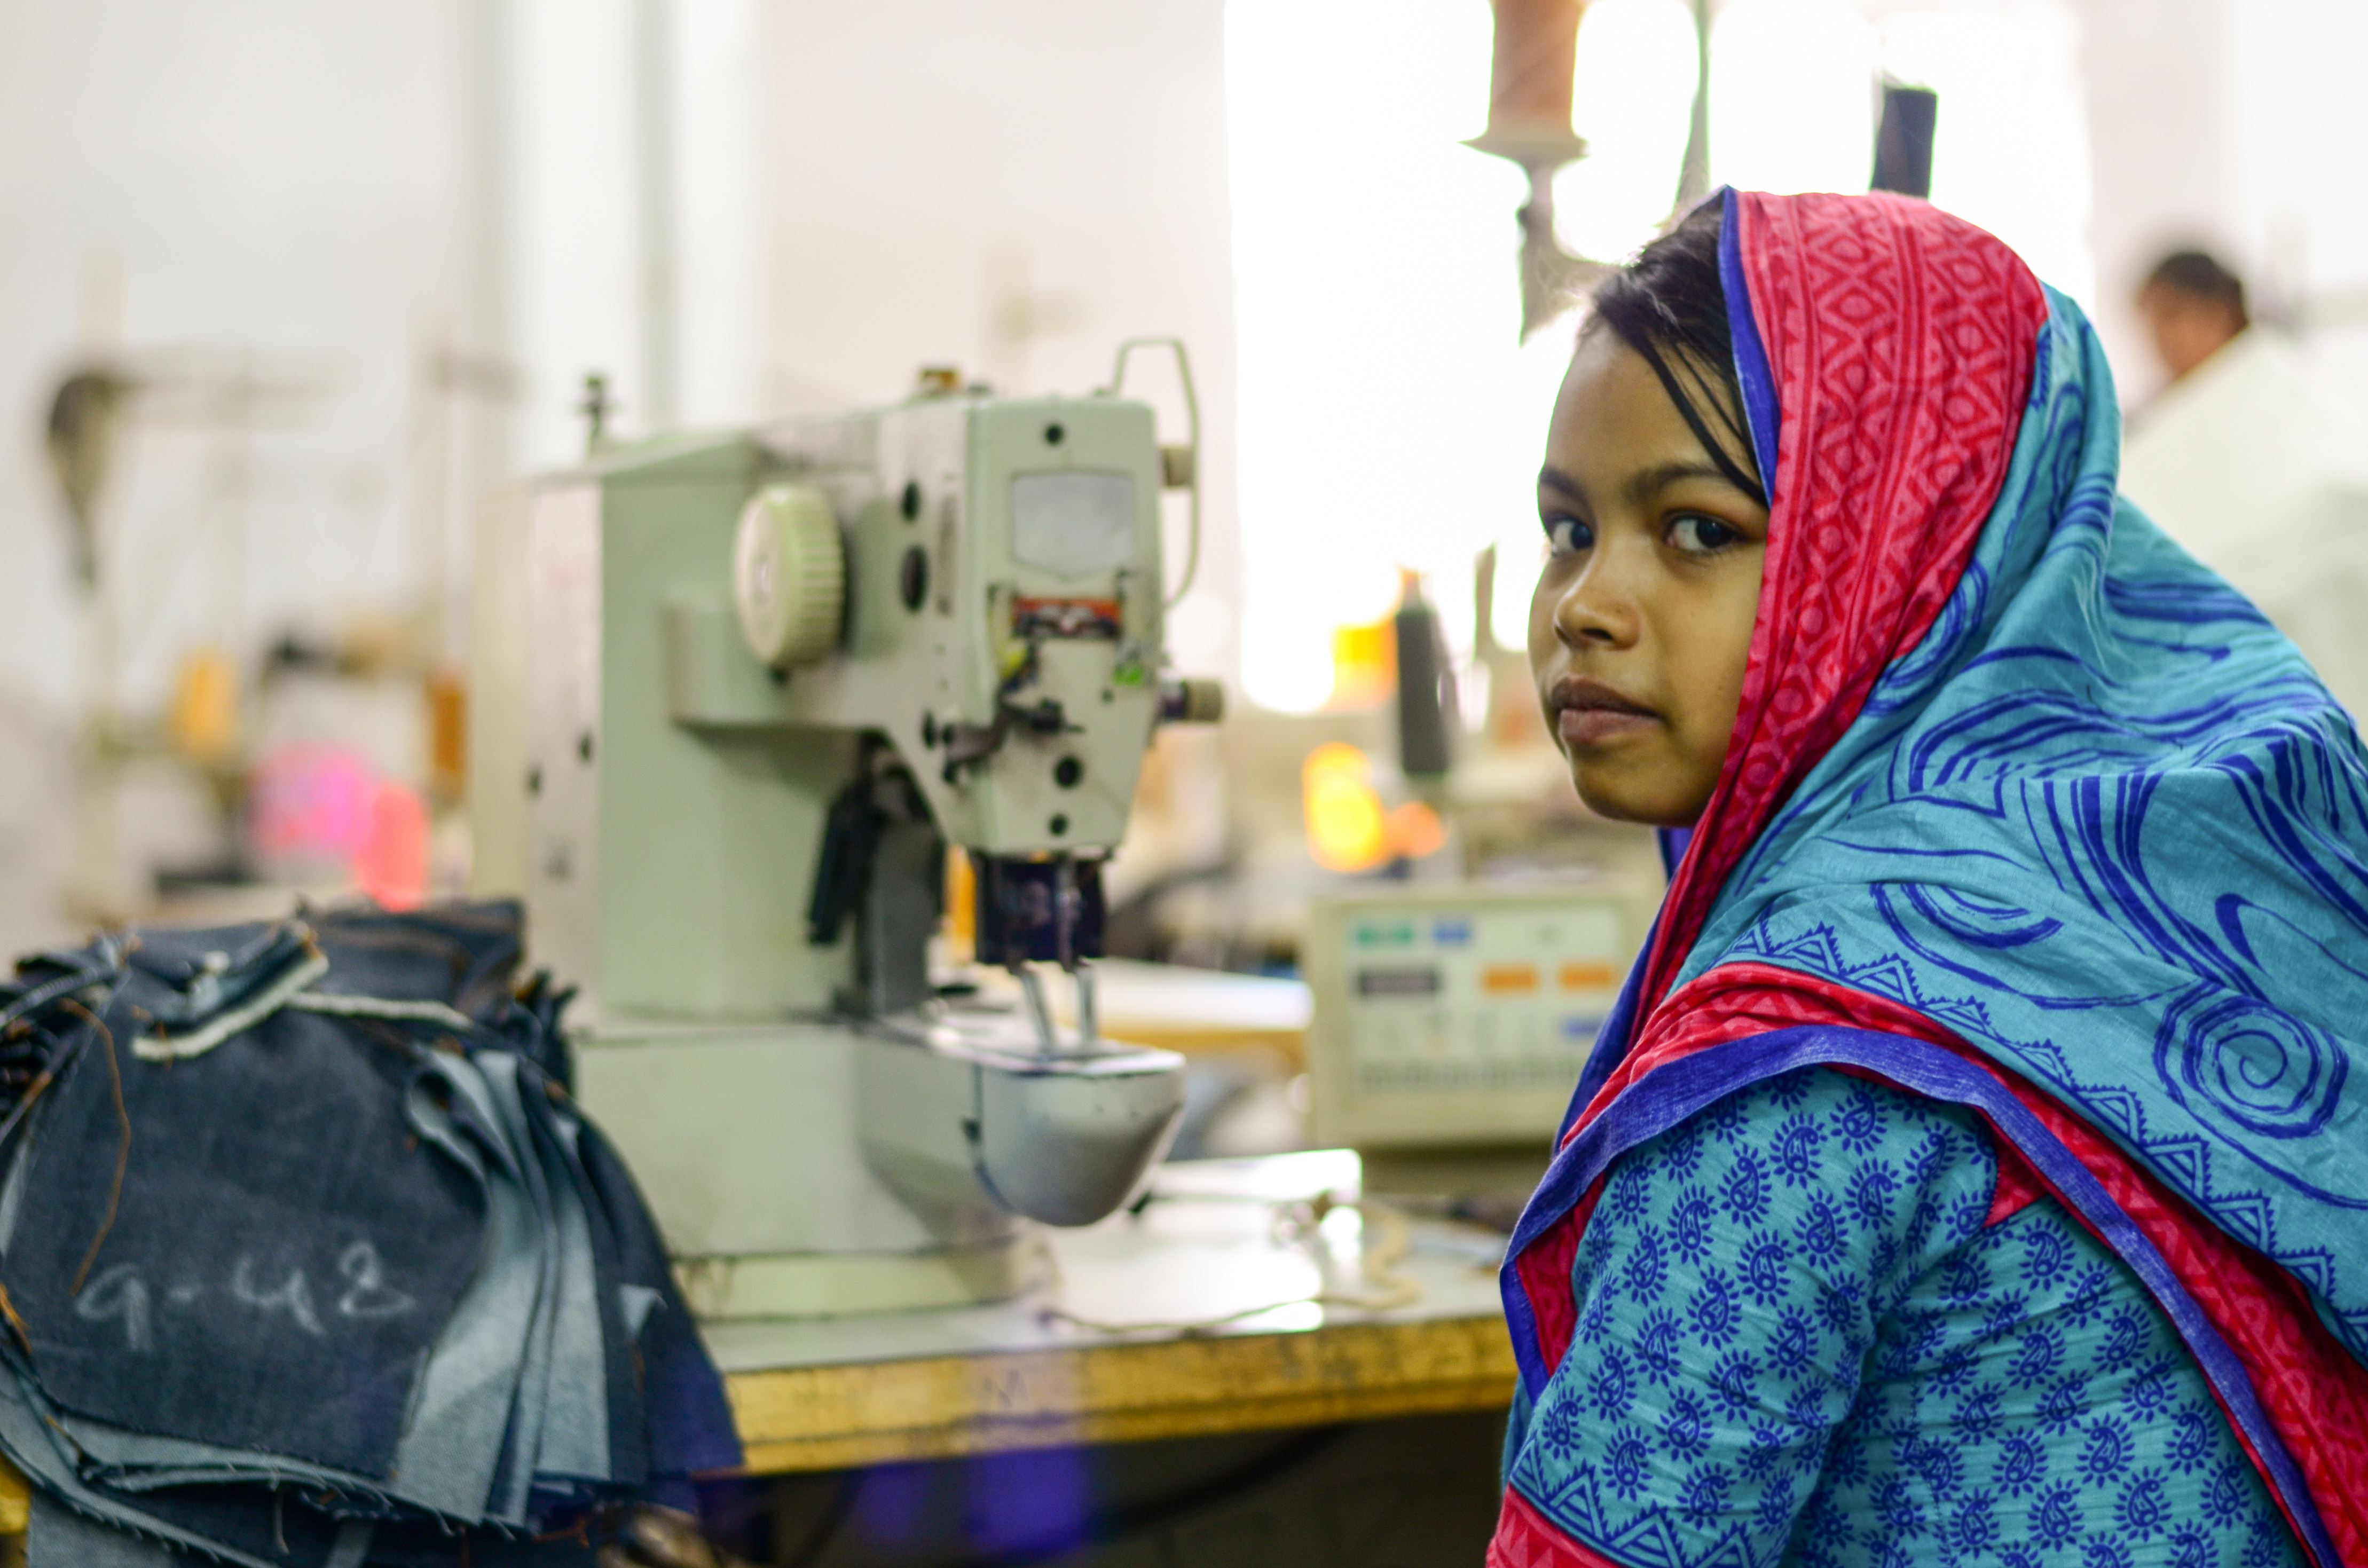 Making clothes since age 12 in Bangladesh